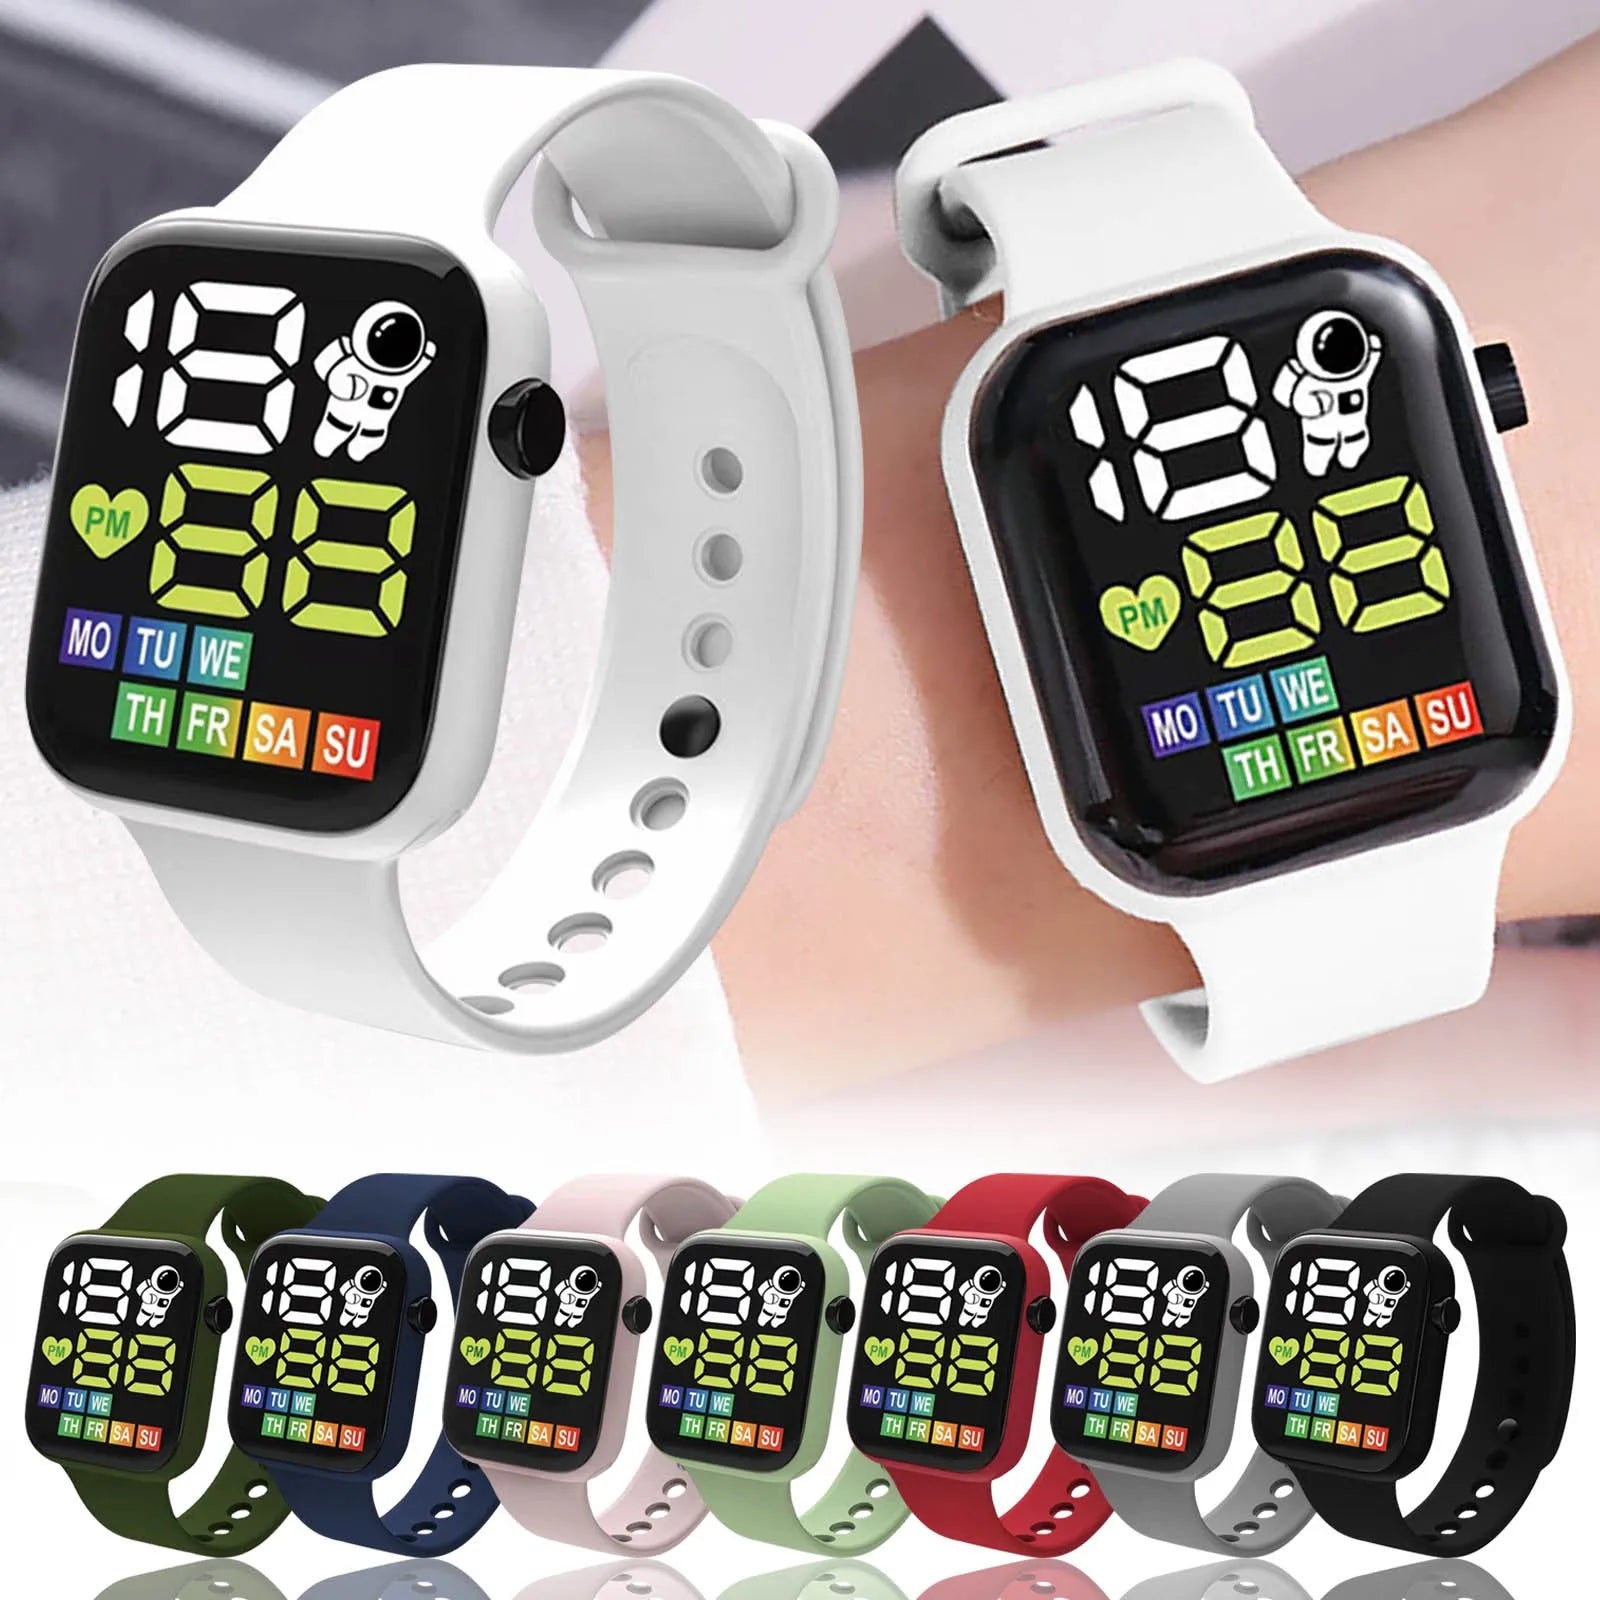 Digital LED Children's Smart Sport Watch with Adjustable Strap - High Quality Materials and Easy Operation  OurLum.com   